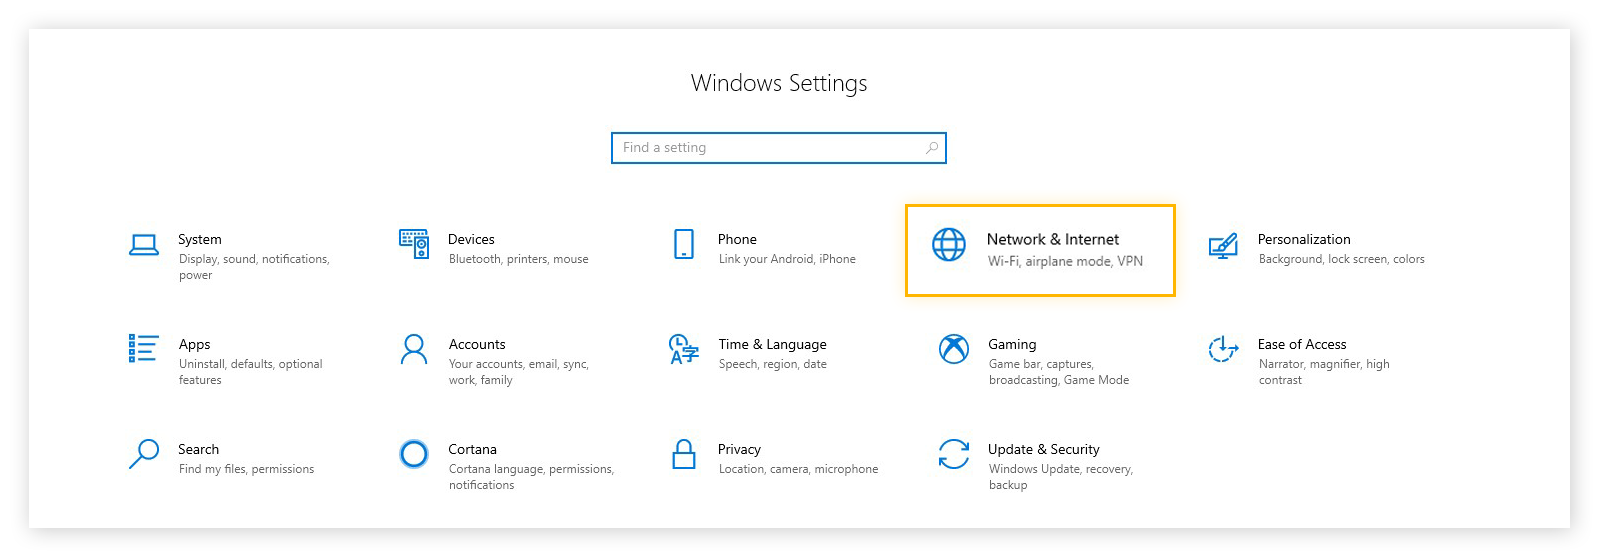 Opening the Network & Internet settings in Windows 10